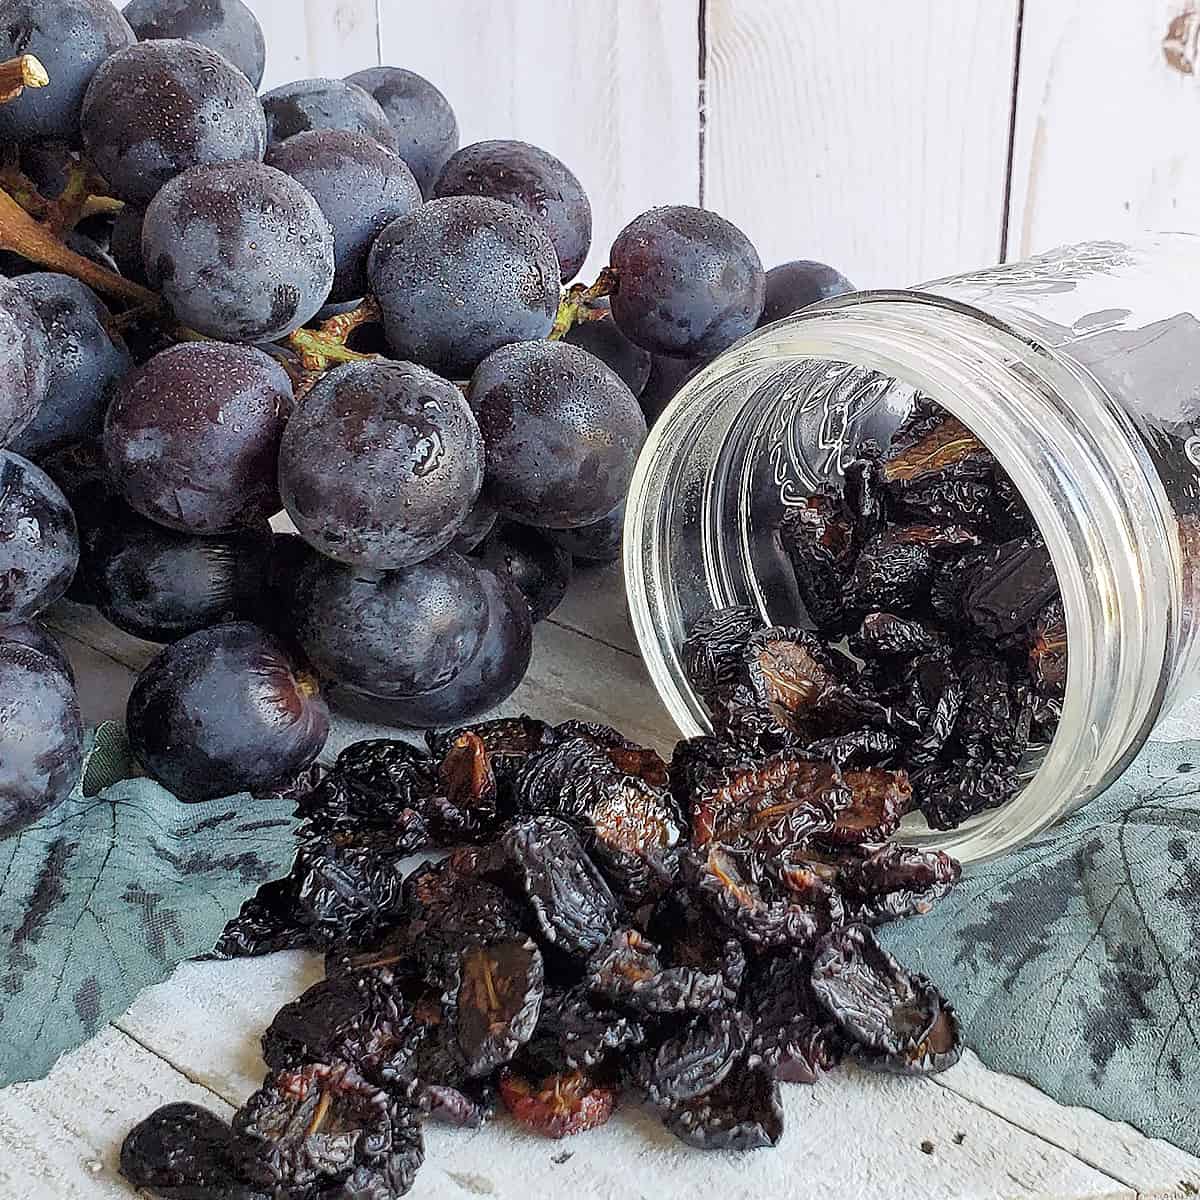 A bunch of purple grapes next to a jar of dehydrated grapes (raisins)